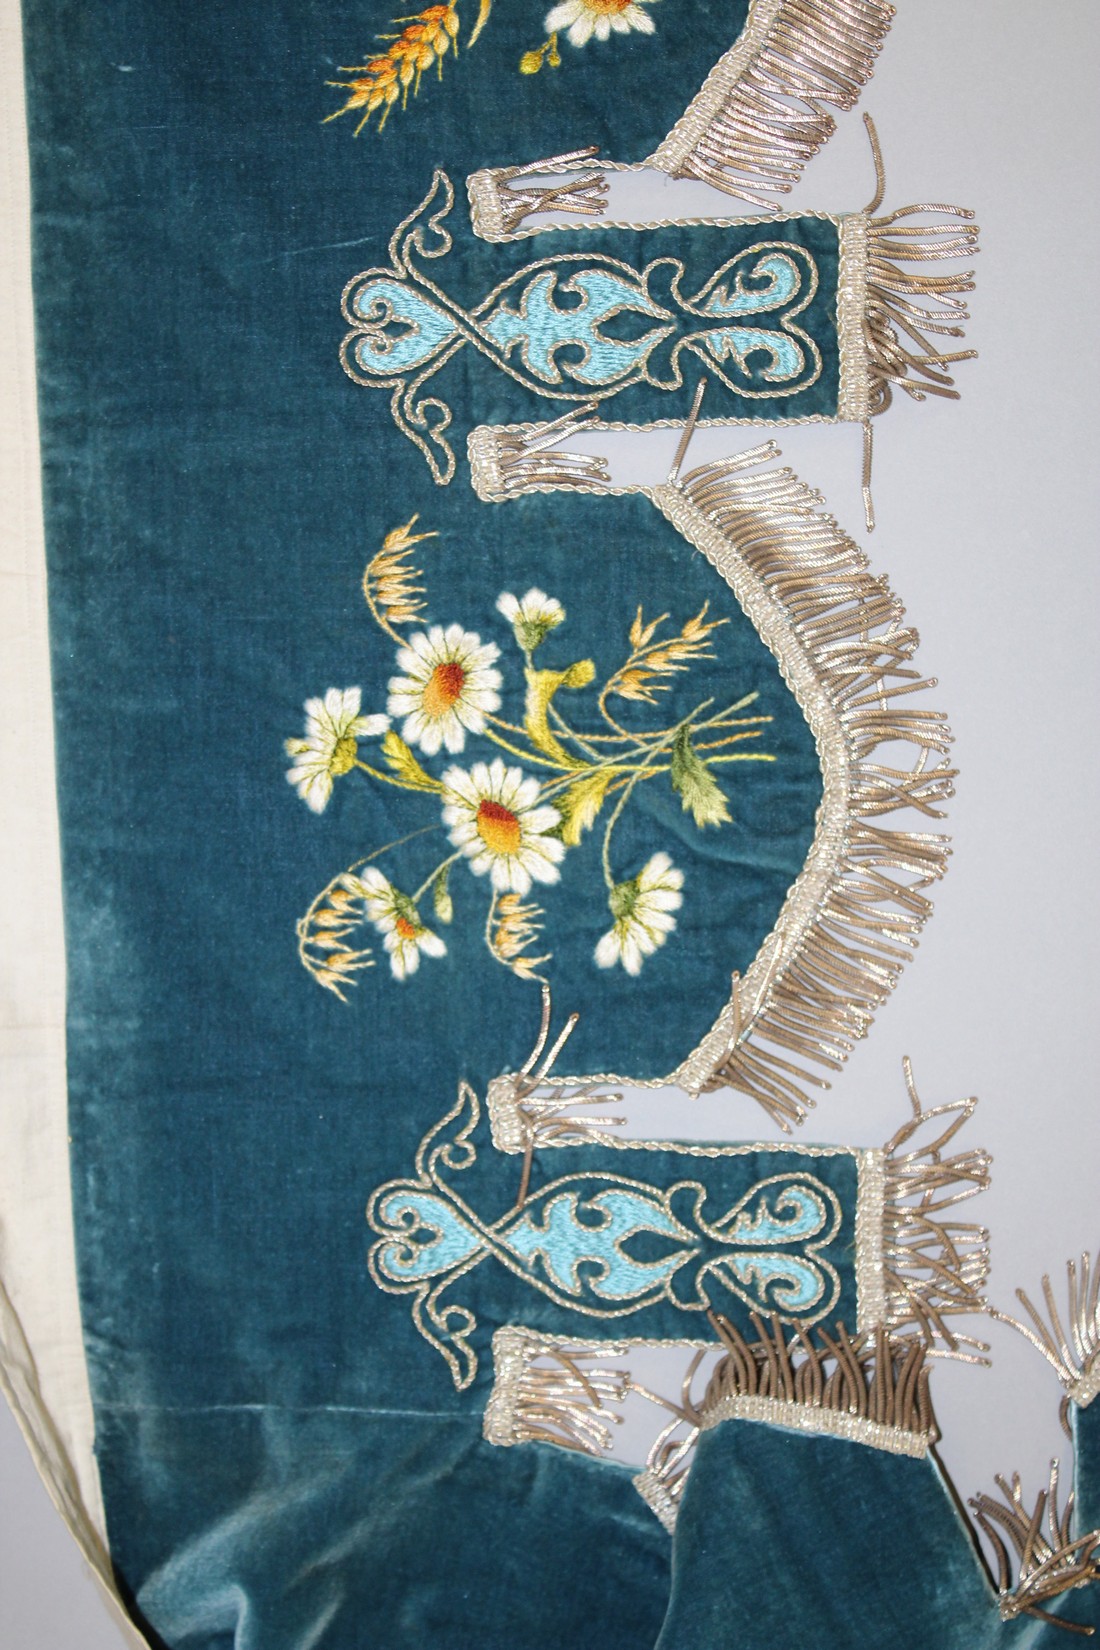 A FINELY EMBROIDERED BLUE VELVET BED HANGING. - Image 4 of 9